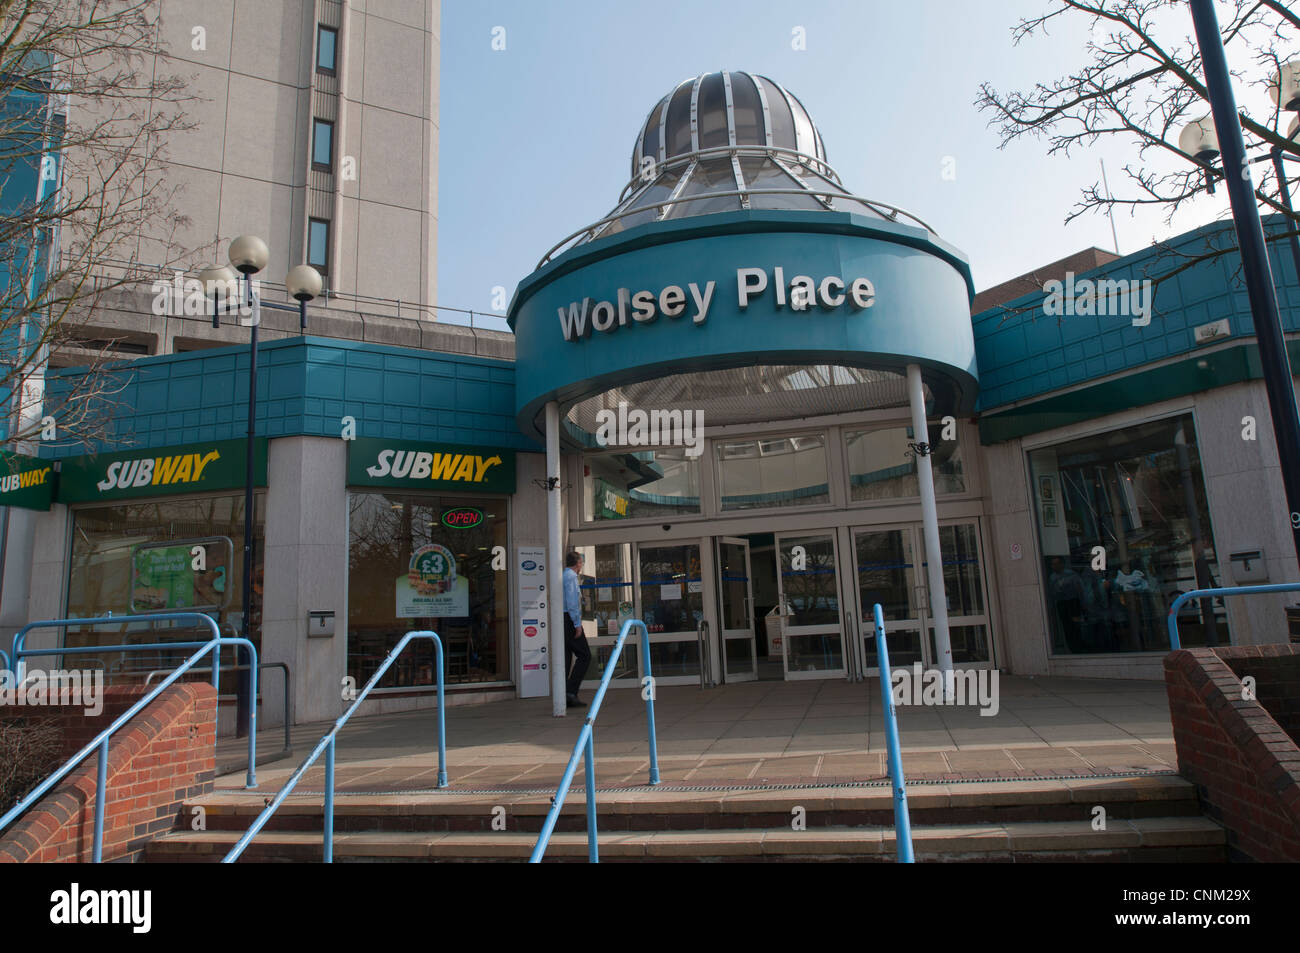 Entrance to Wolsey Place shopping centre in Woking, Surrey, England. EDITORIAL USE ONLY Stock Photo